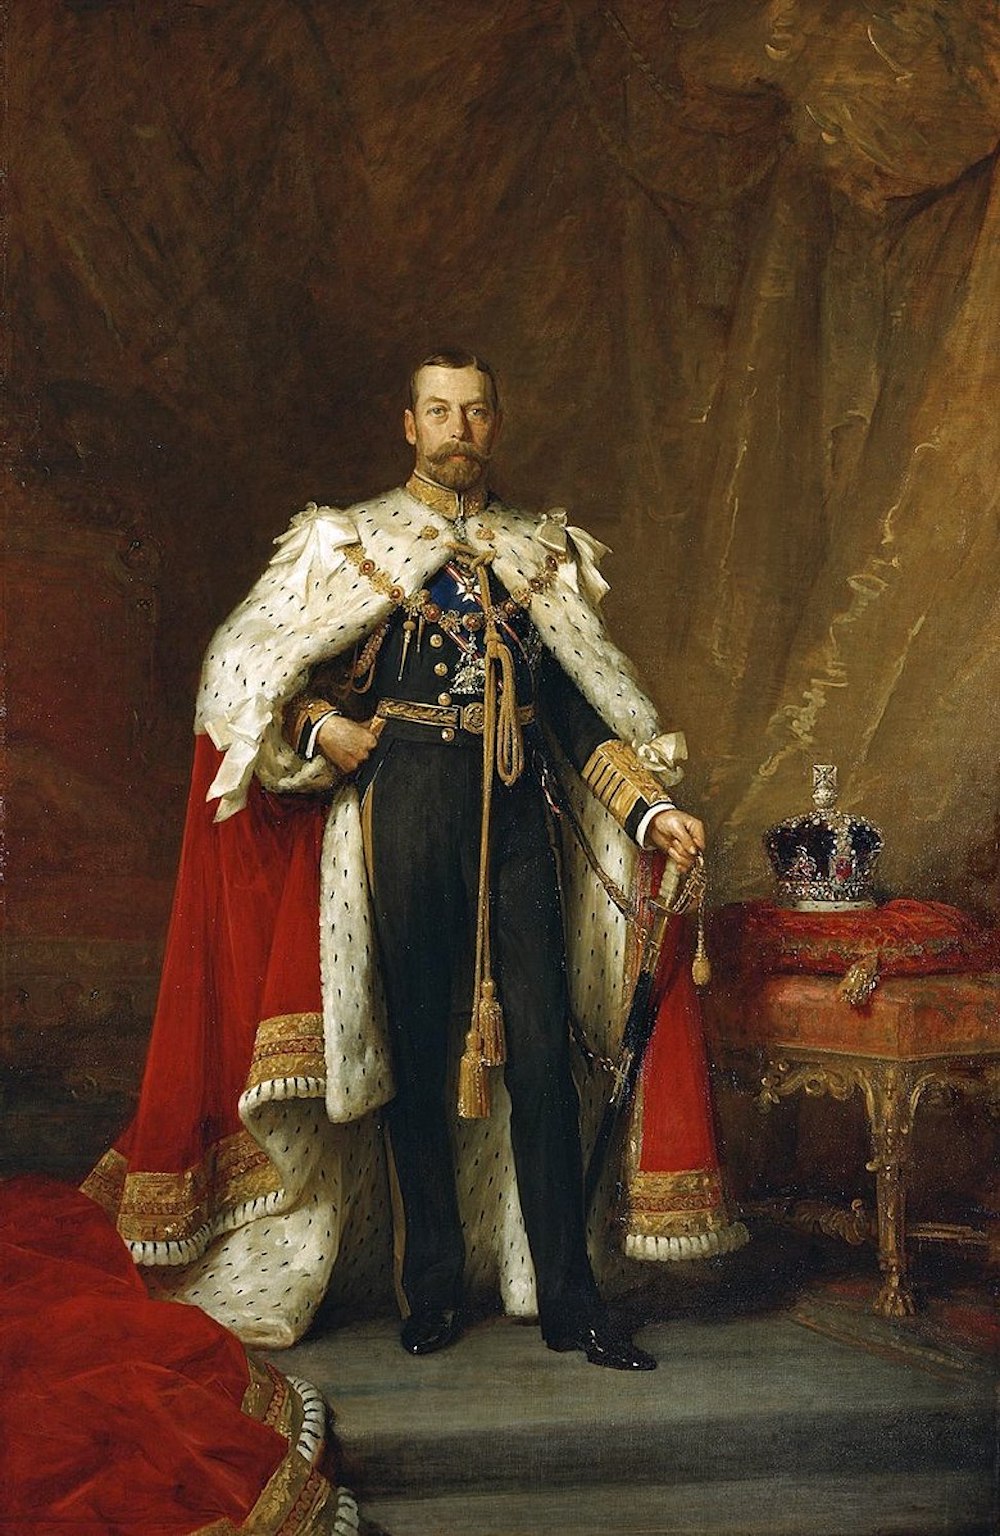 British Monarchs: King George V painting by Luke Fildes. Photo Credit: © Public Domains via Wikimedia Commons.